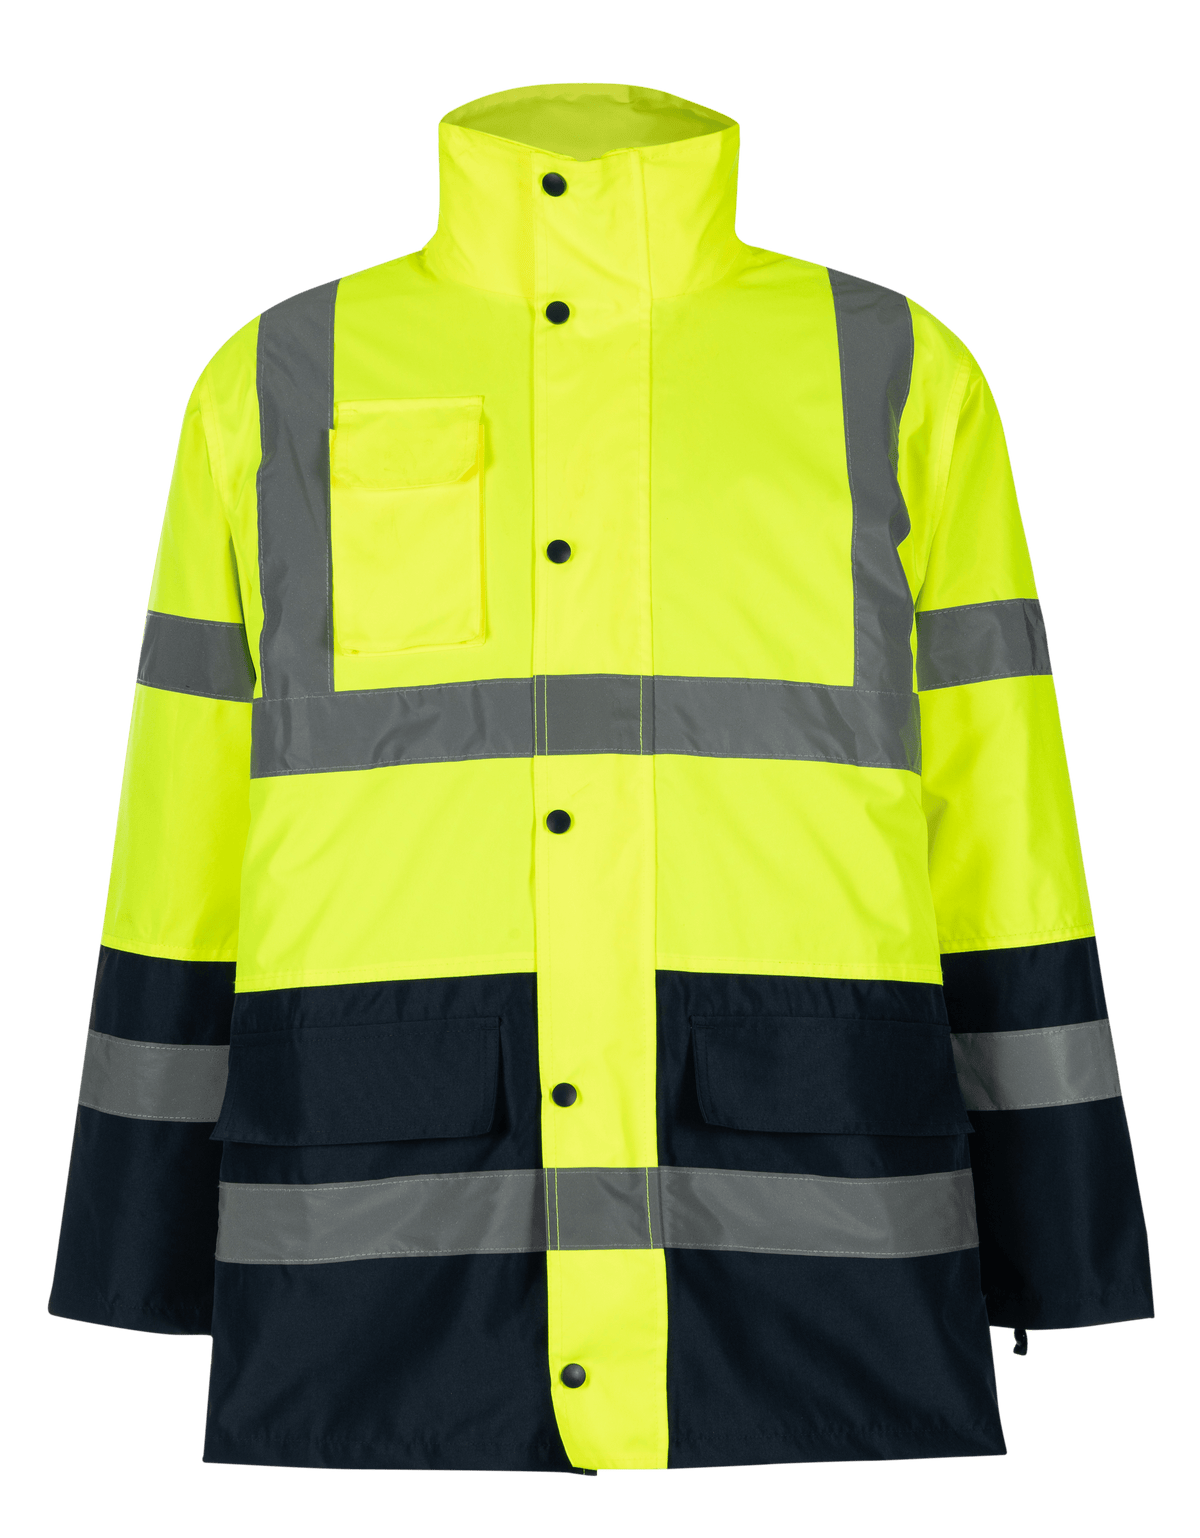 5 in 1 Parka Jacket - High Visibility